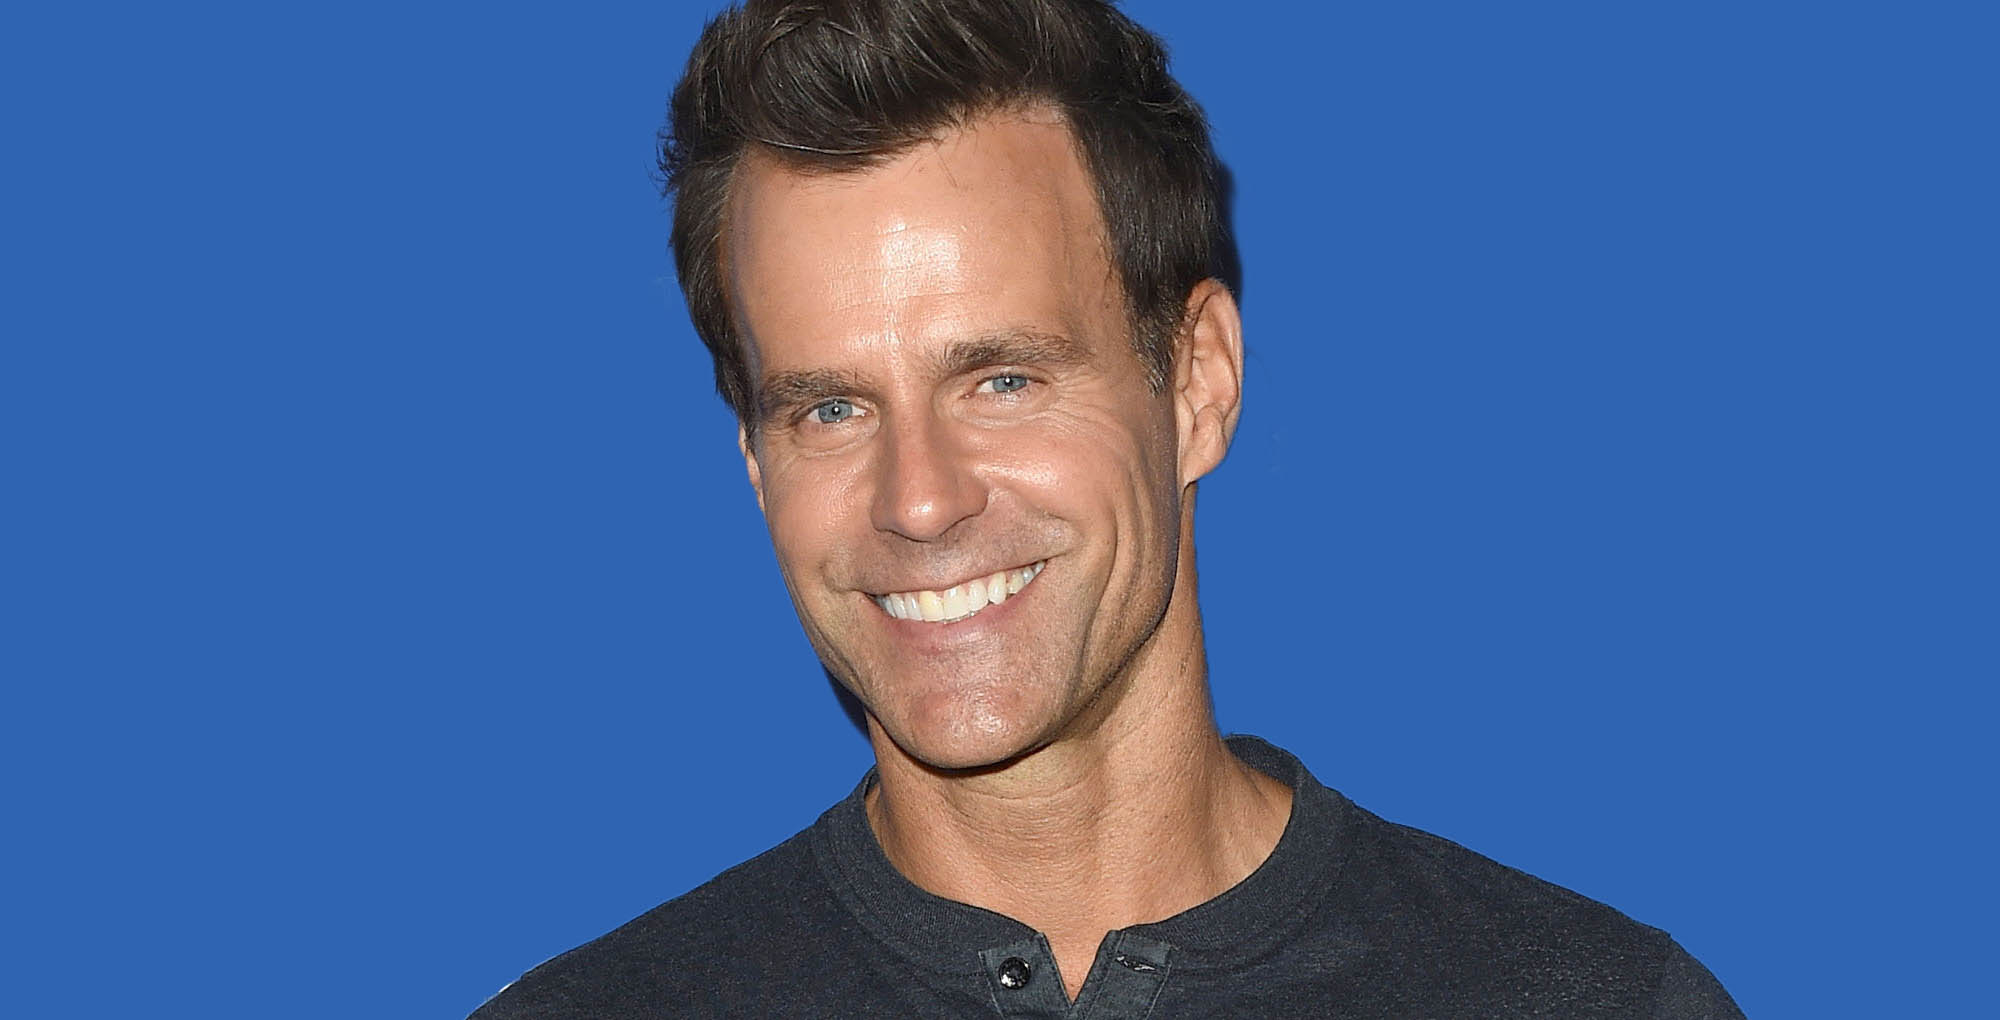 GH's Cameron Mathison Shares an Important Health Update